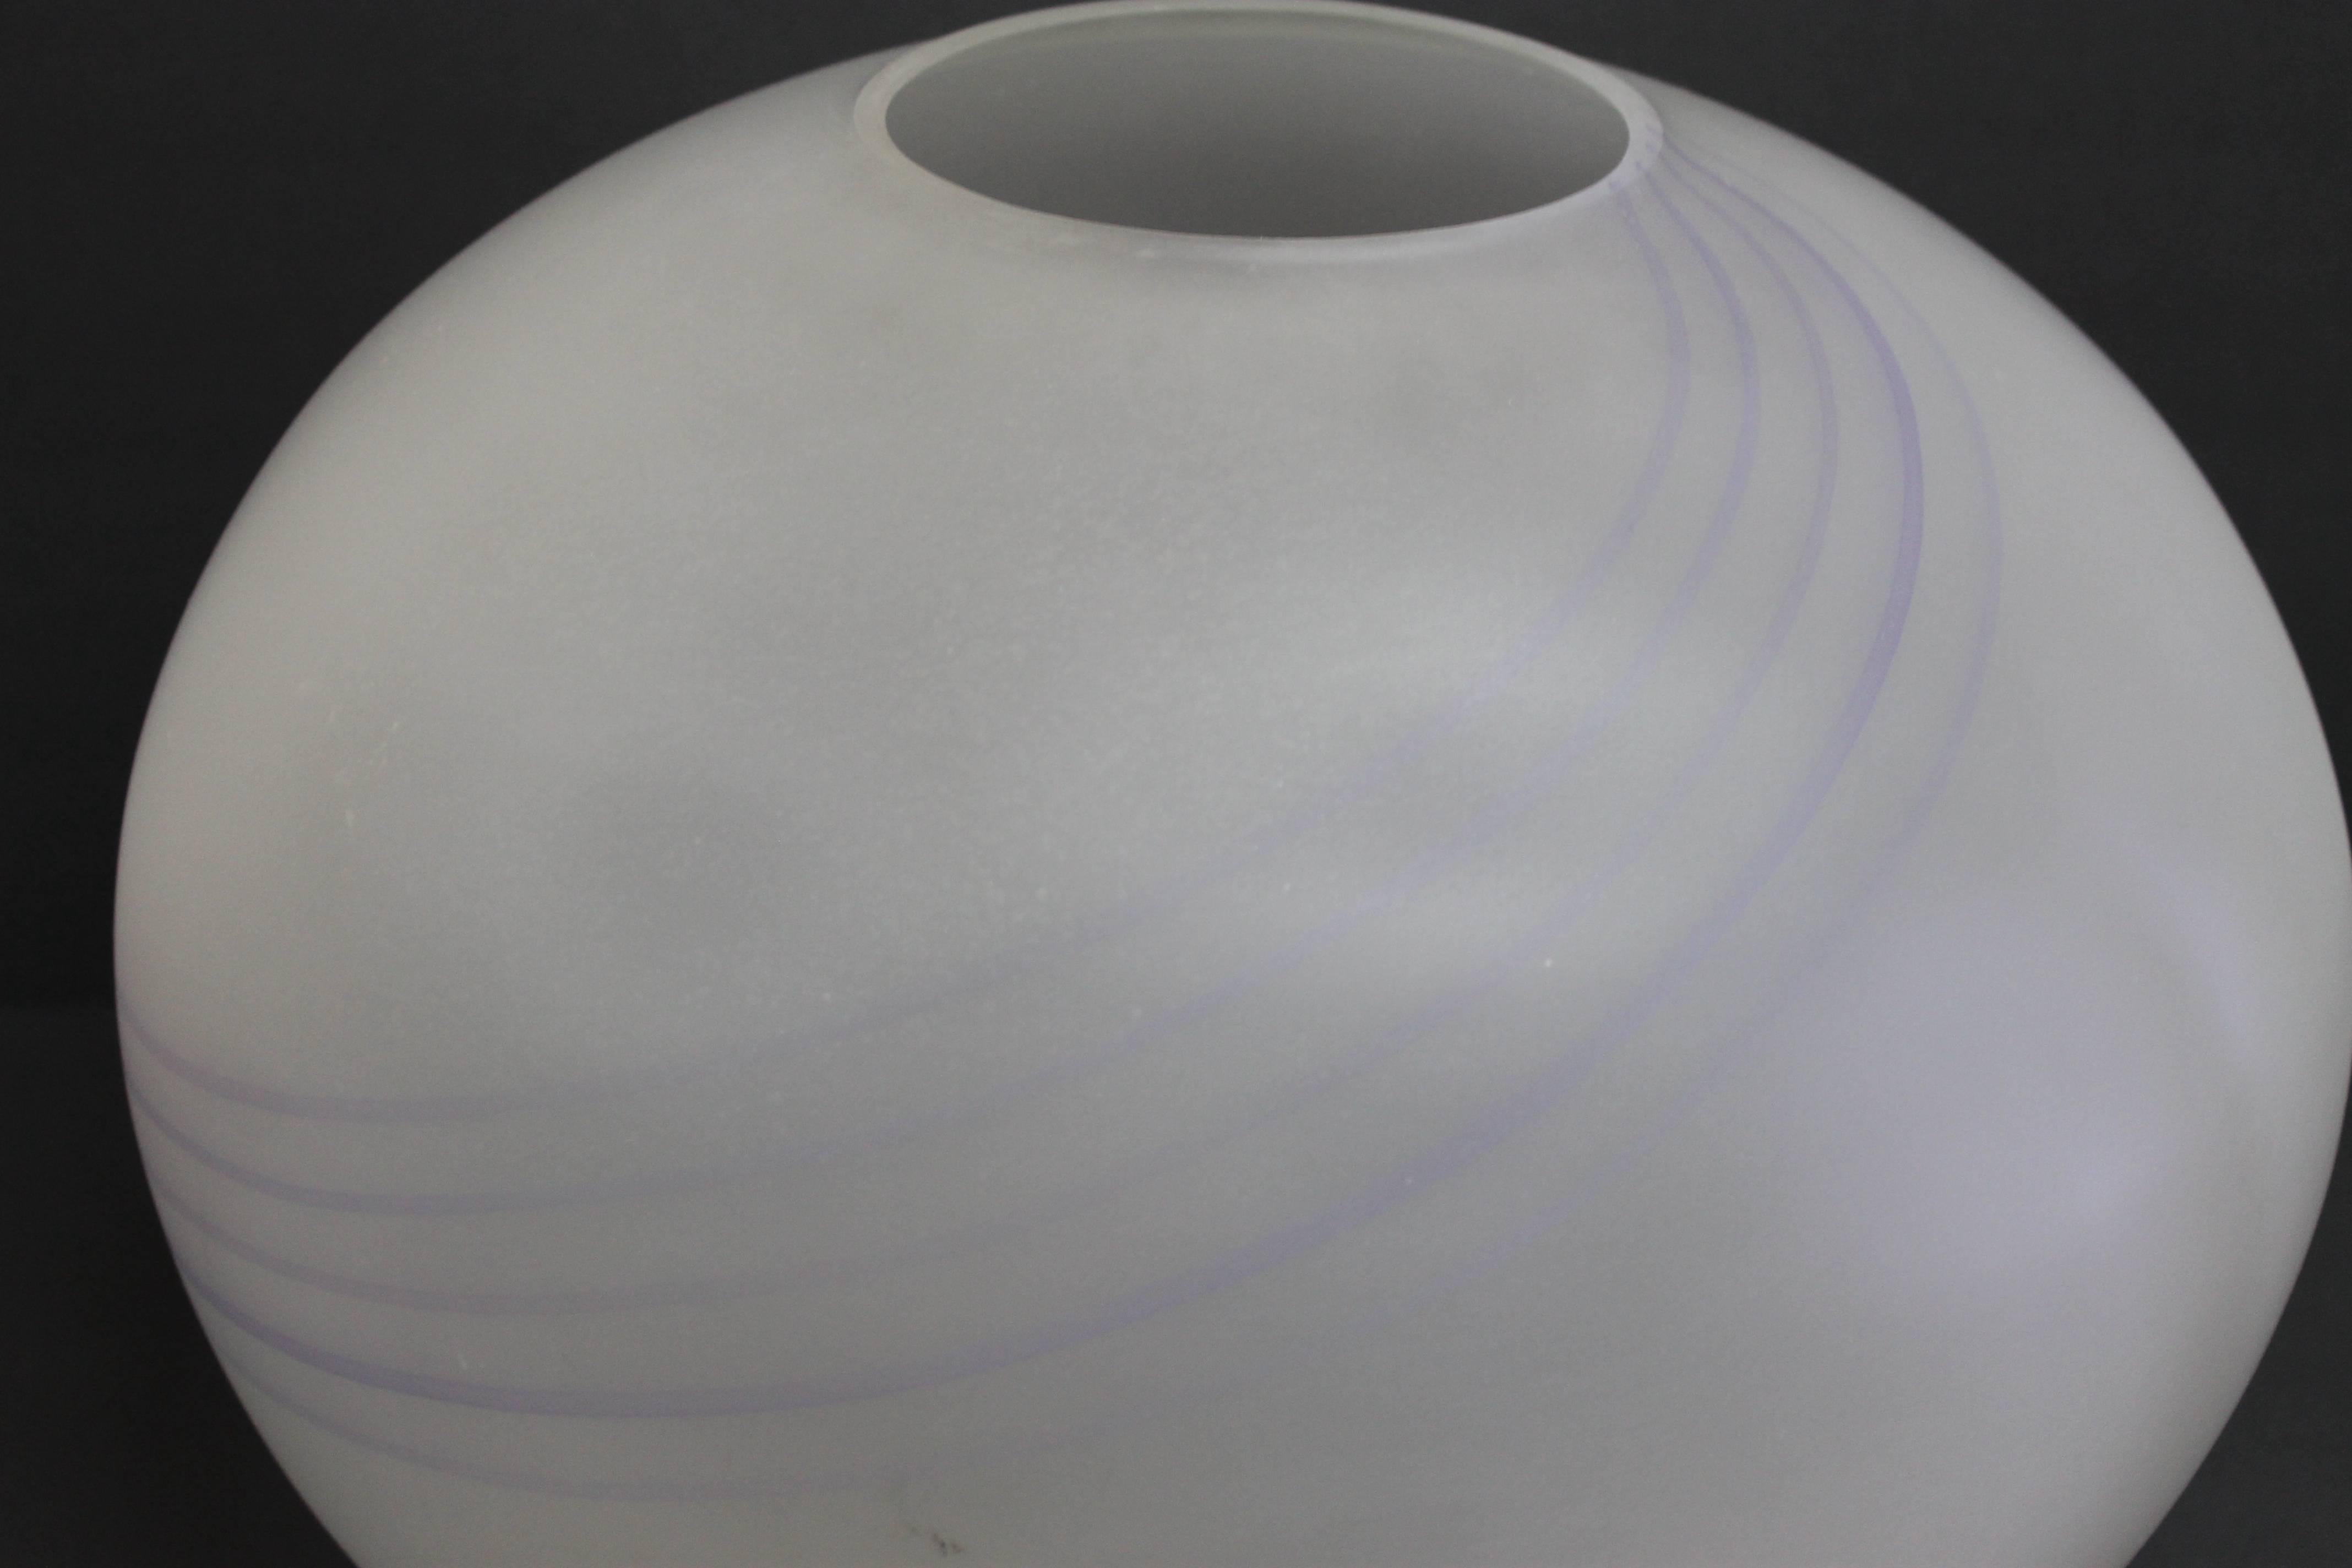 Italian frosted vase with five bands of violet starting at bottom of vase and circling to the top. Has a decal on bottom stating 'Made in Italy'. Reminds me of milk glass. Vase is 12